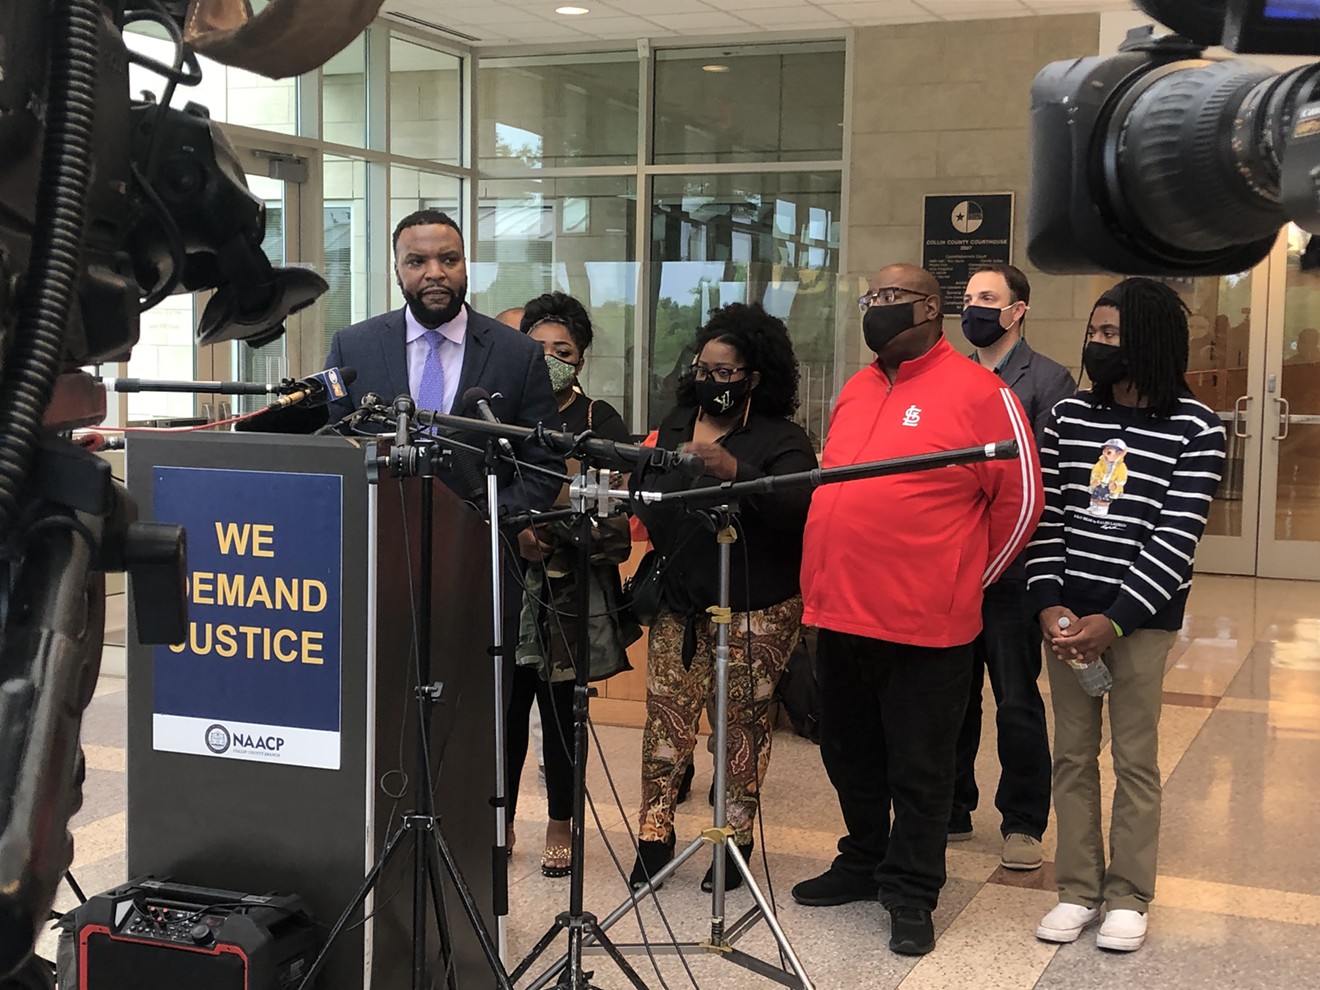 Attorney Lee Merritt is demanding the arrests of the officers involved in the death of Marvin Scott III.